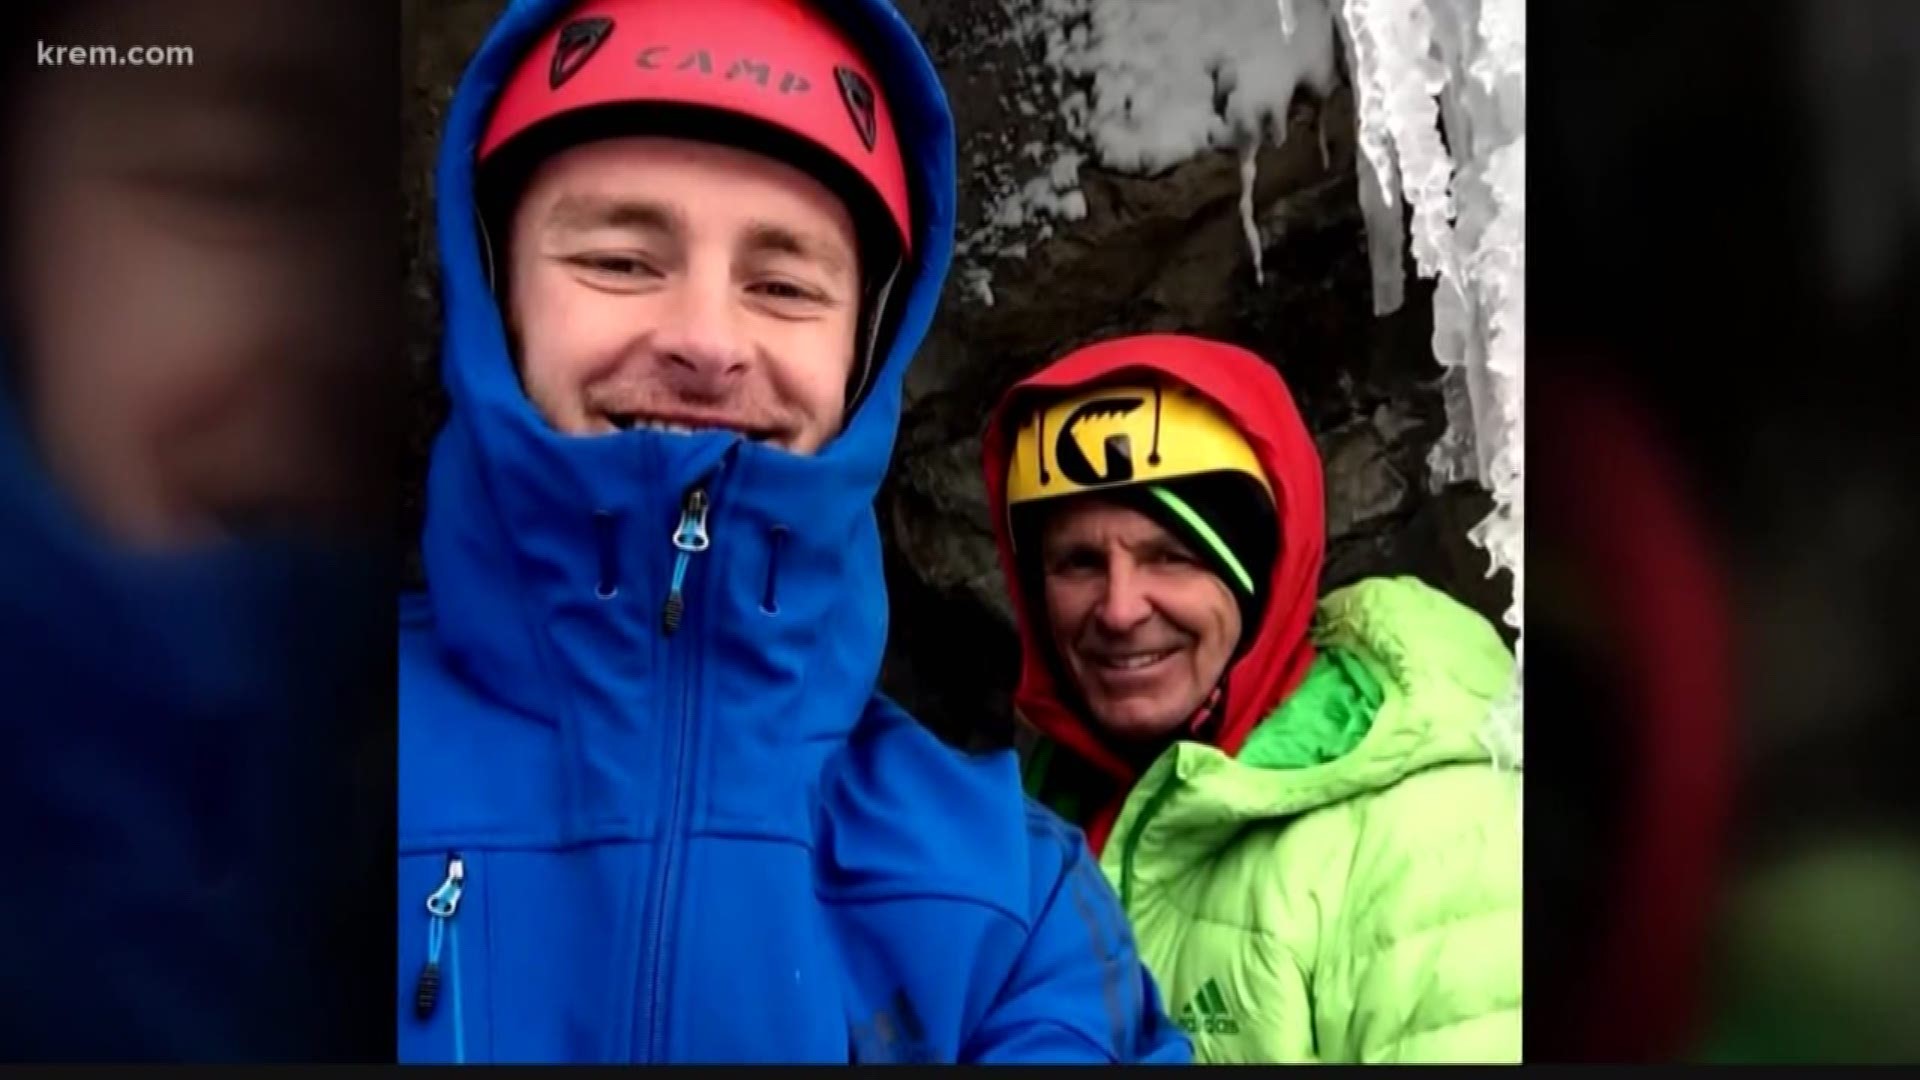 Jess Rosskelley and three other climbers are presumed dead in the Canadian Rockies. CBS caught an exclusive interview with his family to talk about his life and passion for climbing.